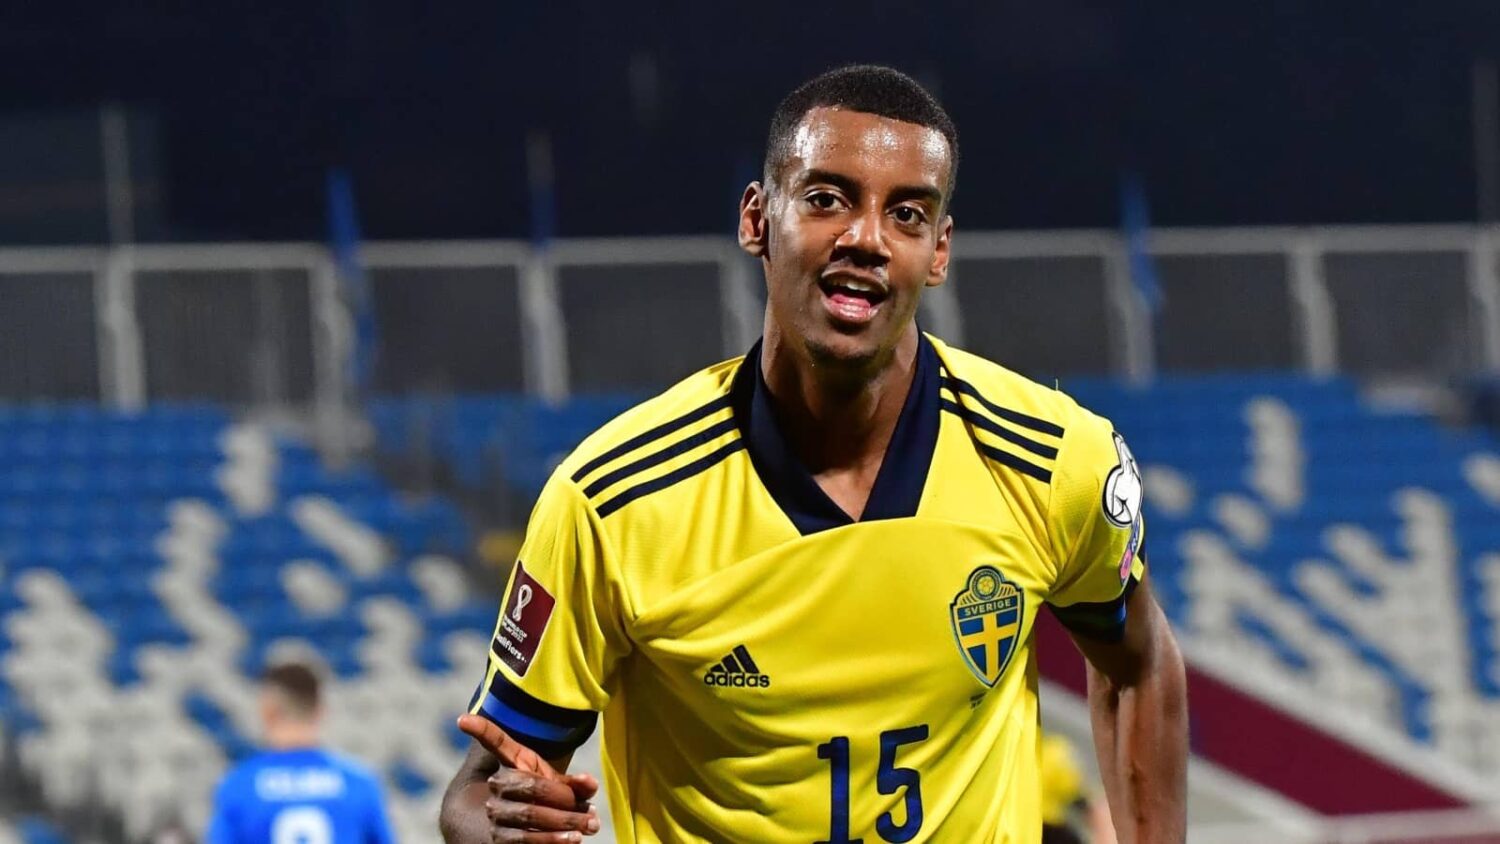 Newcastle’s Alexander Isak Likely To Be Out Until After World Cup With Thigh Injury